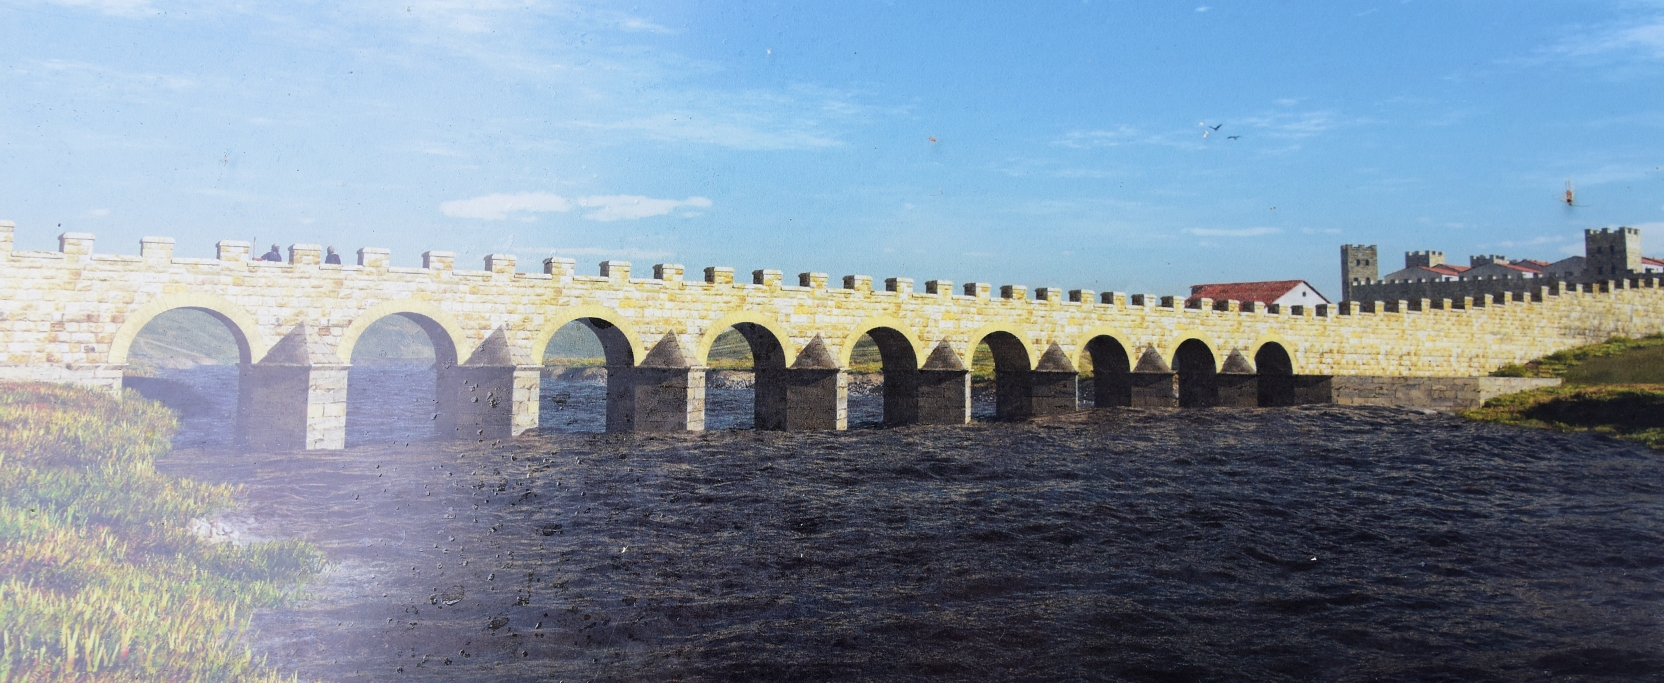 Artists Impression of the First Roman Bridge (Photo taken from English Heritage information board)